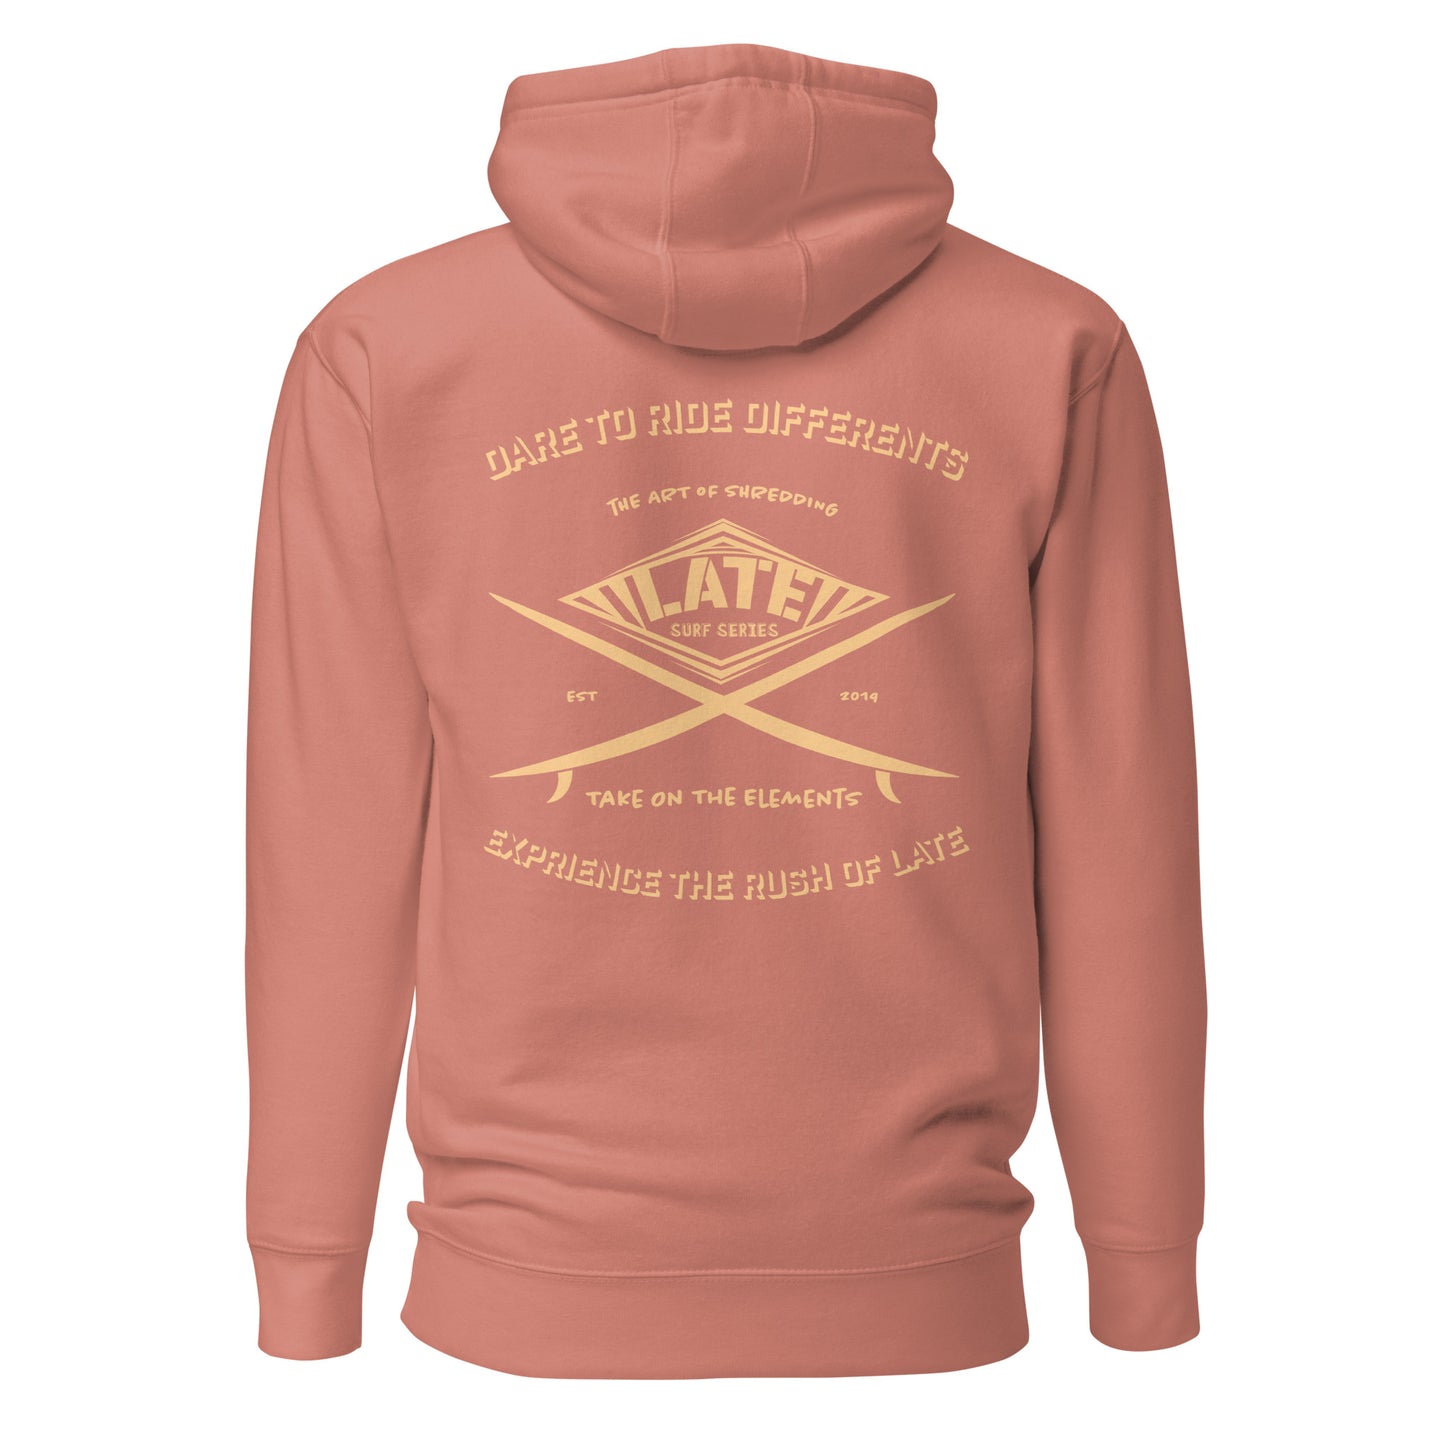 Hoodie surf dusty rose dare to ride differents / the art of shredding / take on the elements / Logo Late surf series